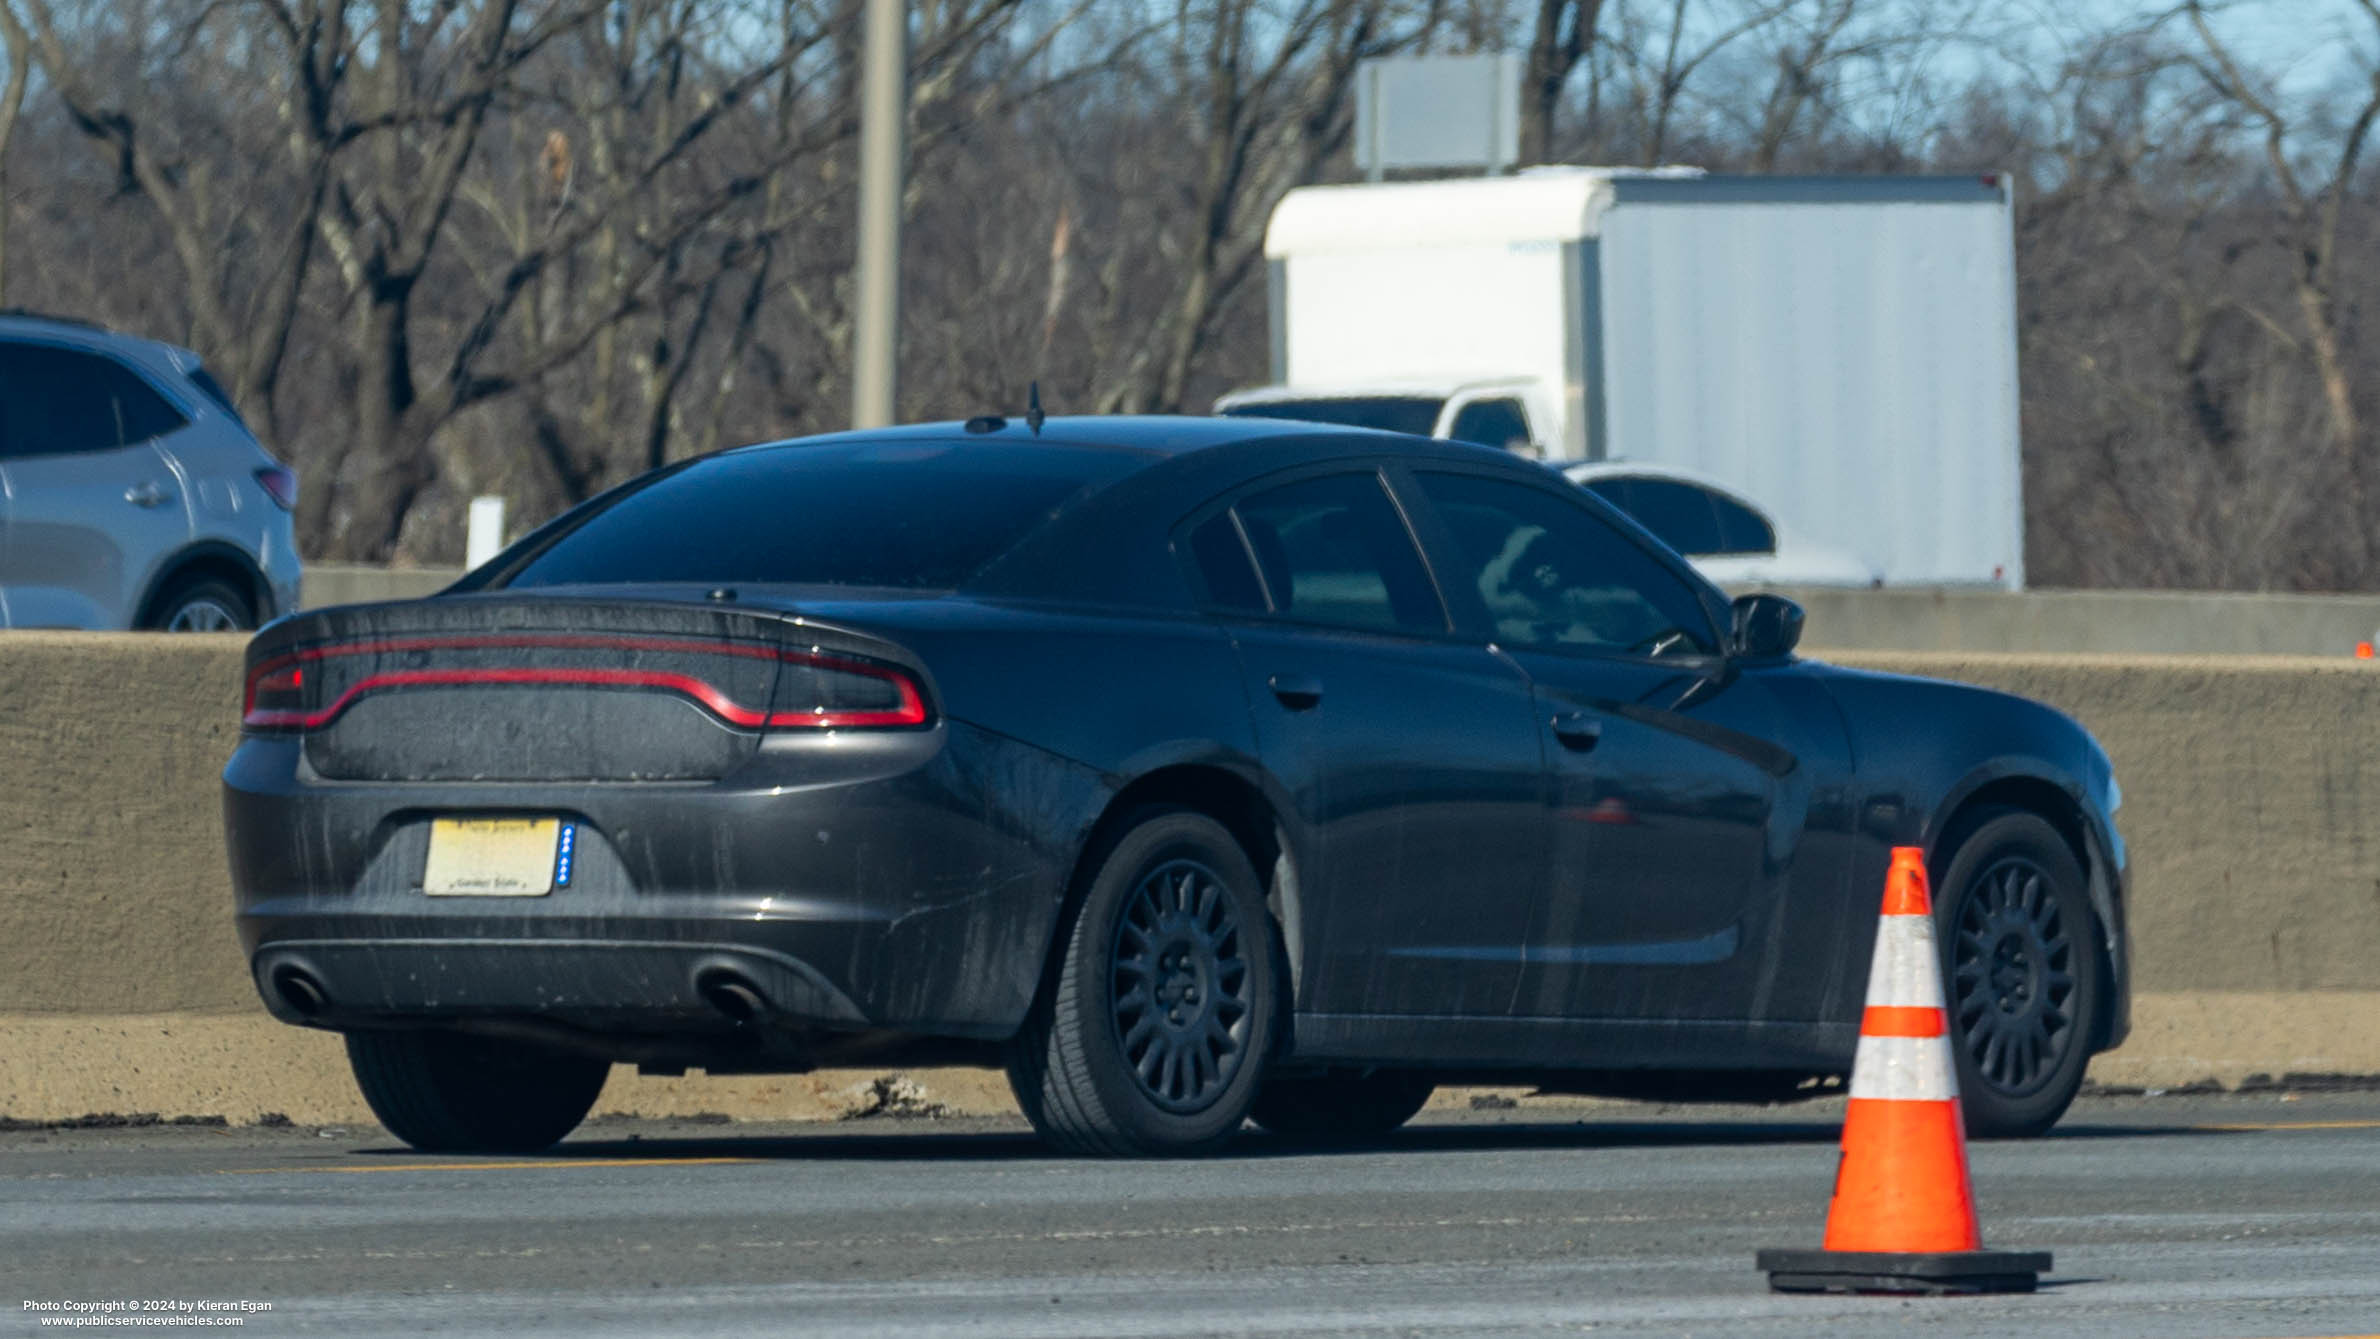 A photo  of New Jersey State Police
            Unmarked Unit, a 2018 Dodge Charger             taken by Kieran Egan